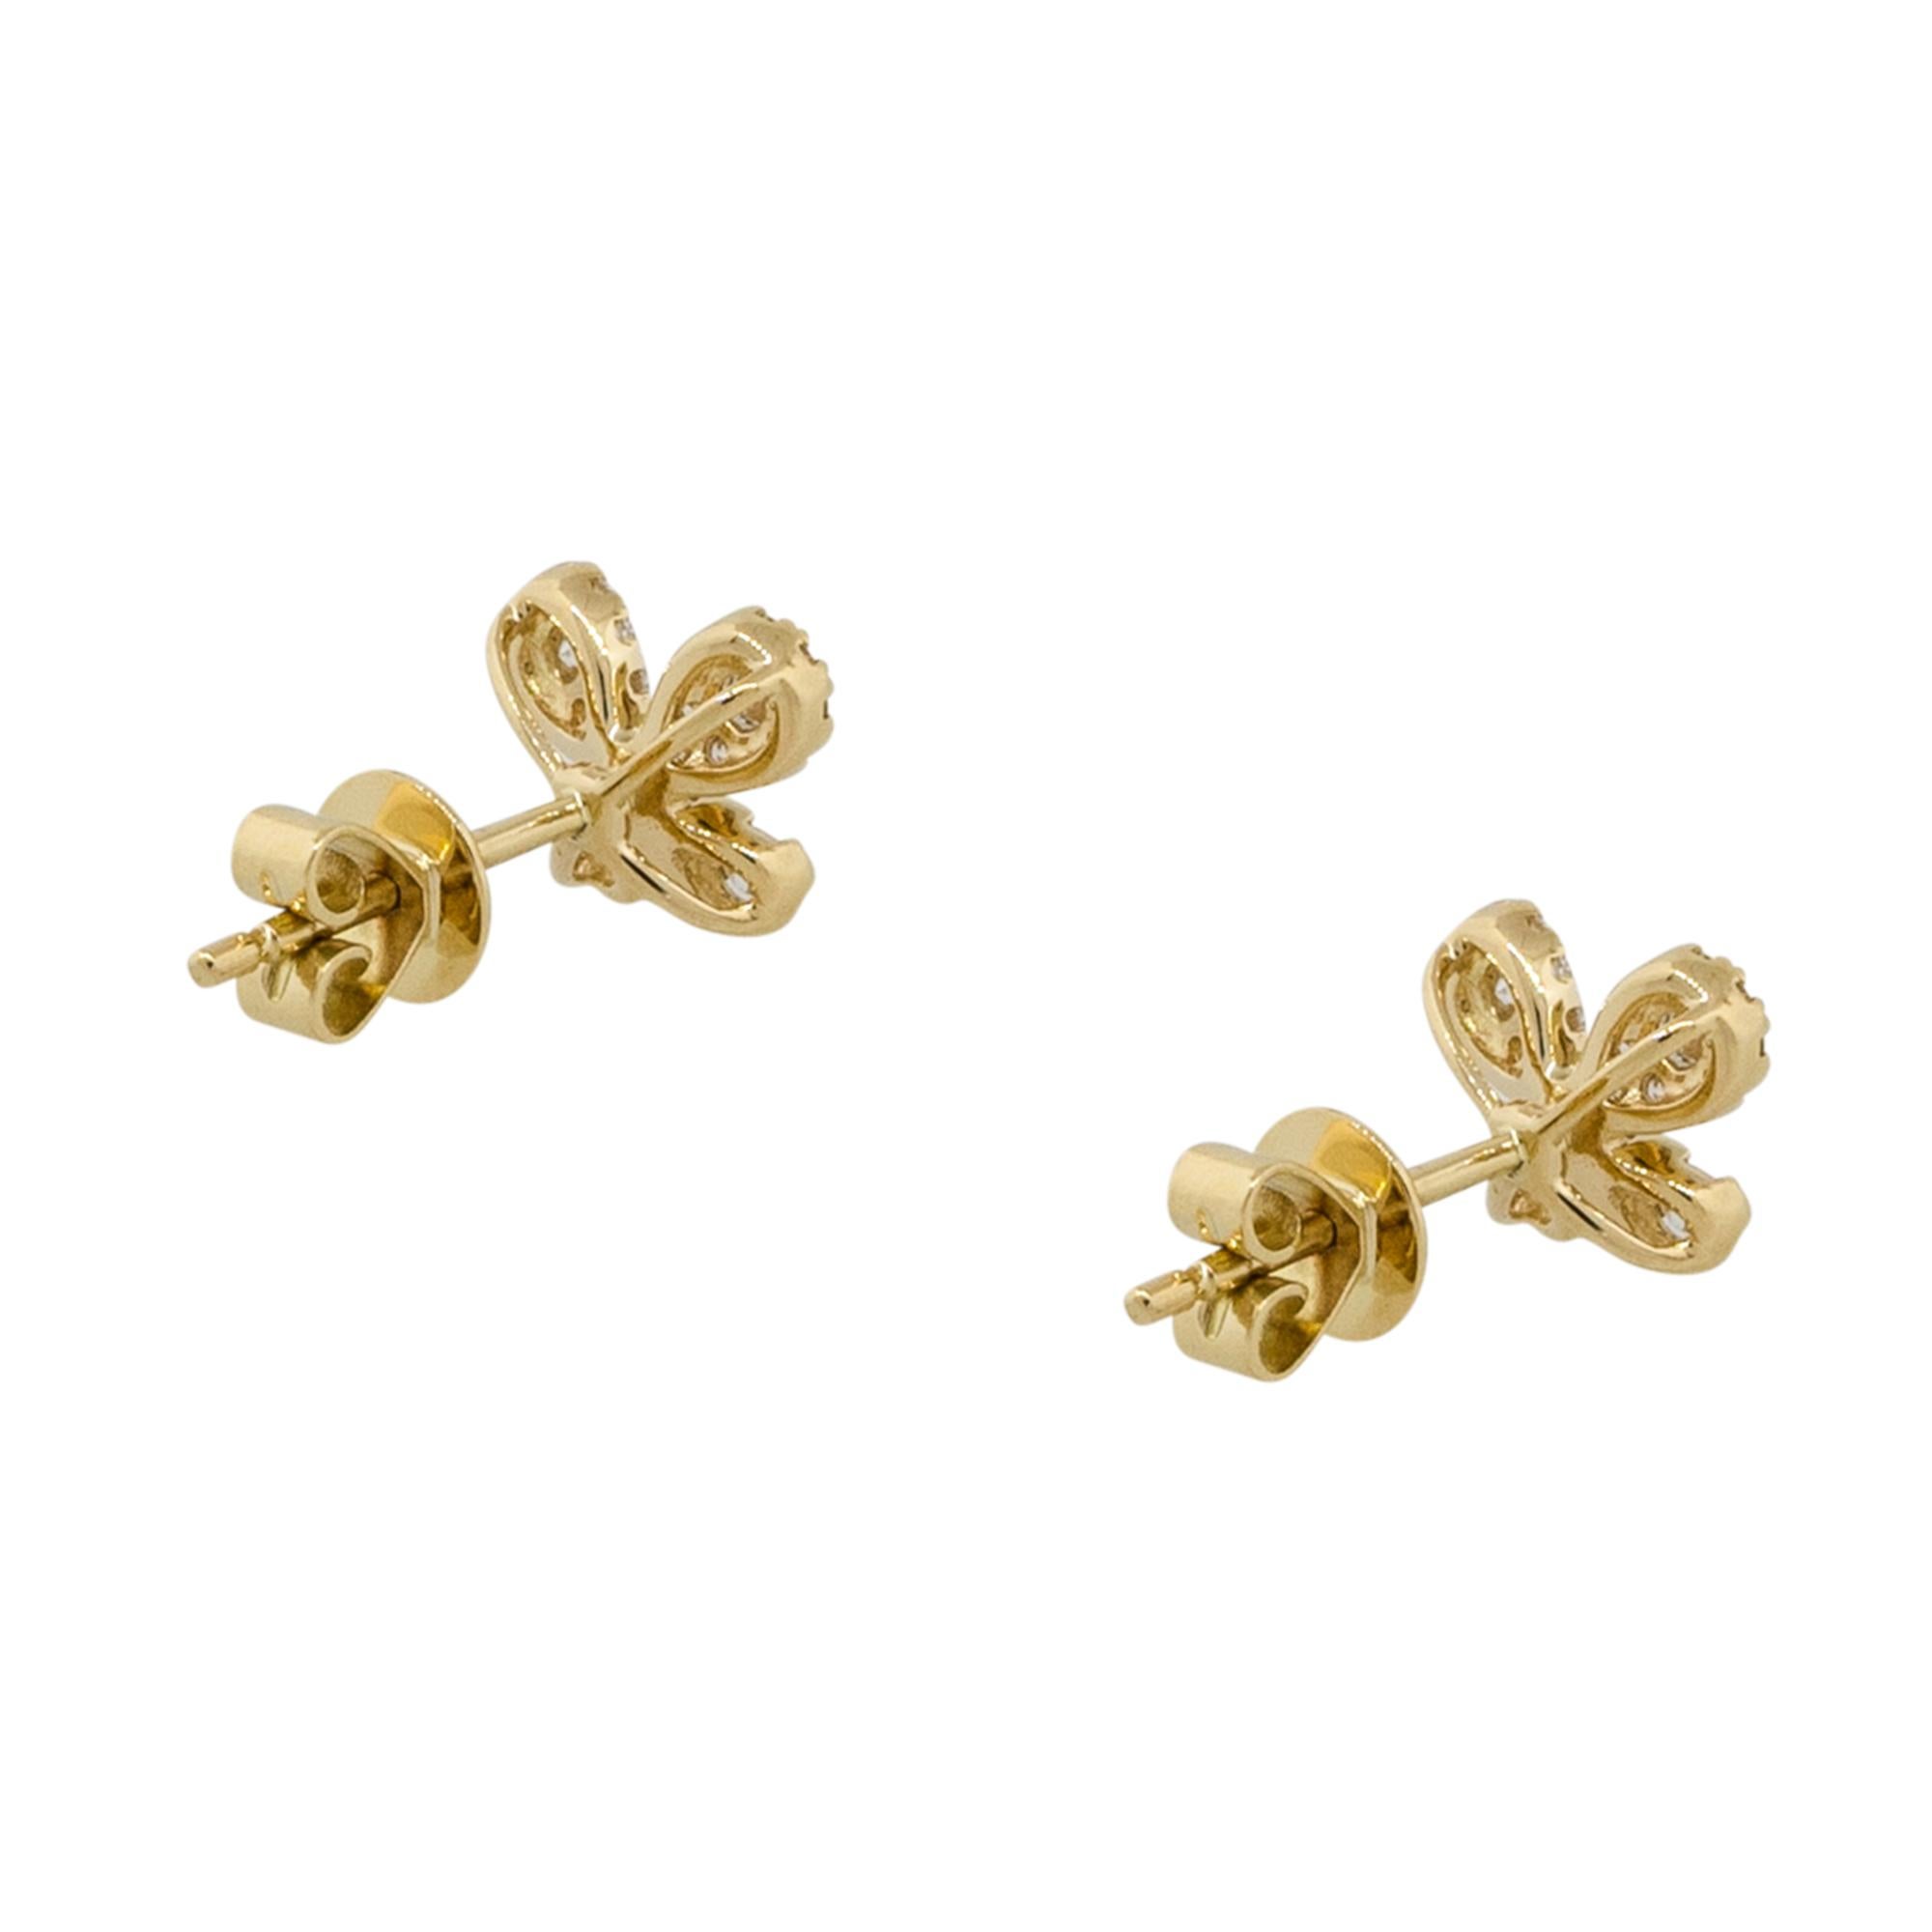 0.39 Carat Diamond Butterfly Pave Earring Studs 18 Karat In New Condition For Sale In Boca Raton, FL